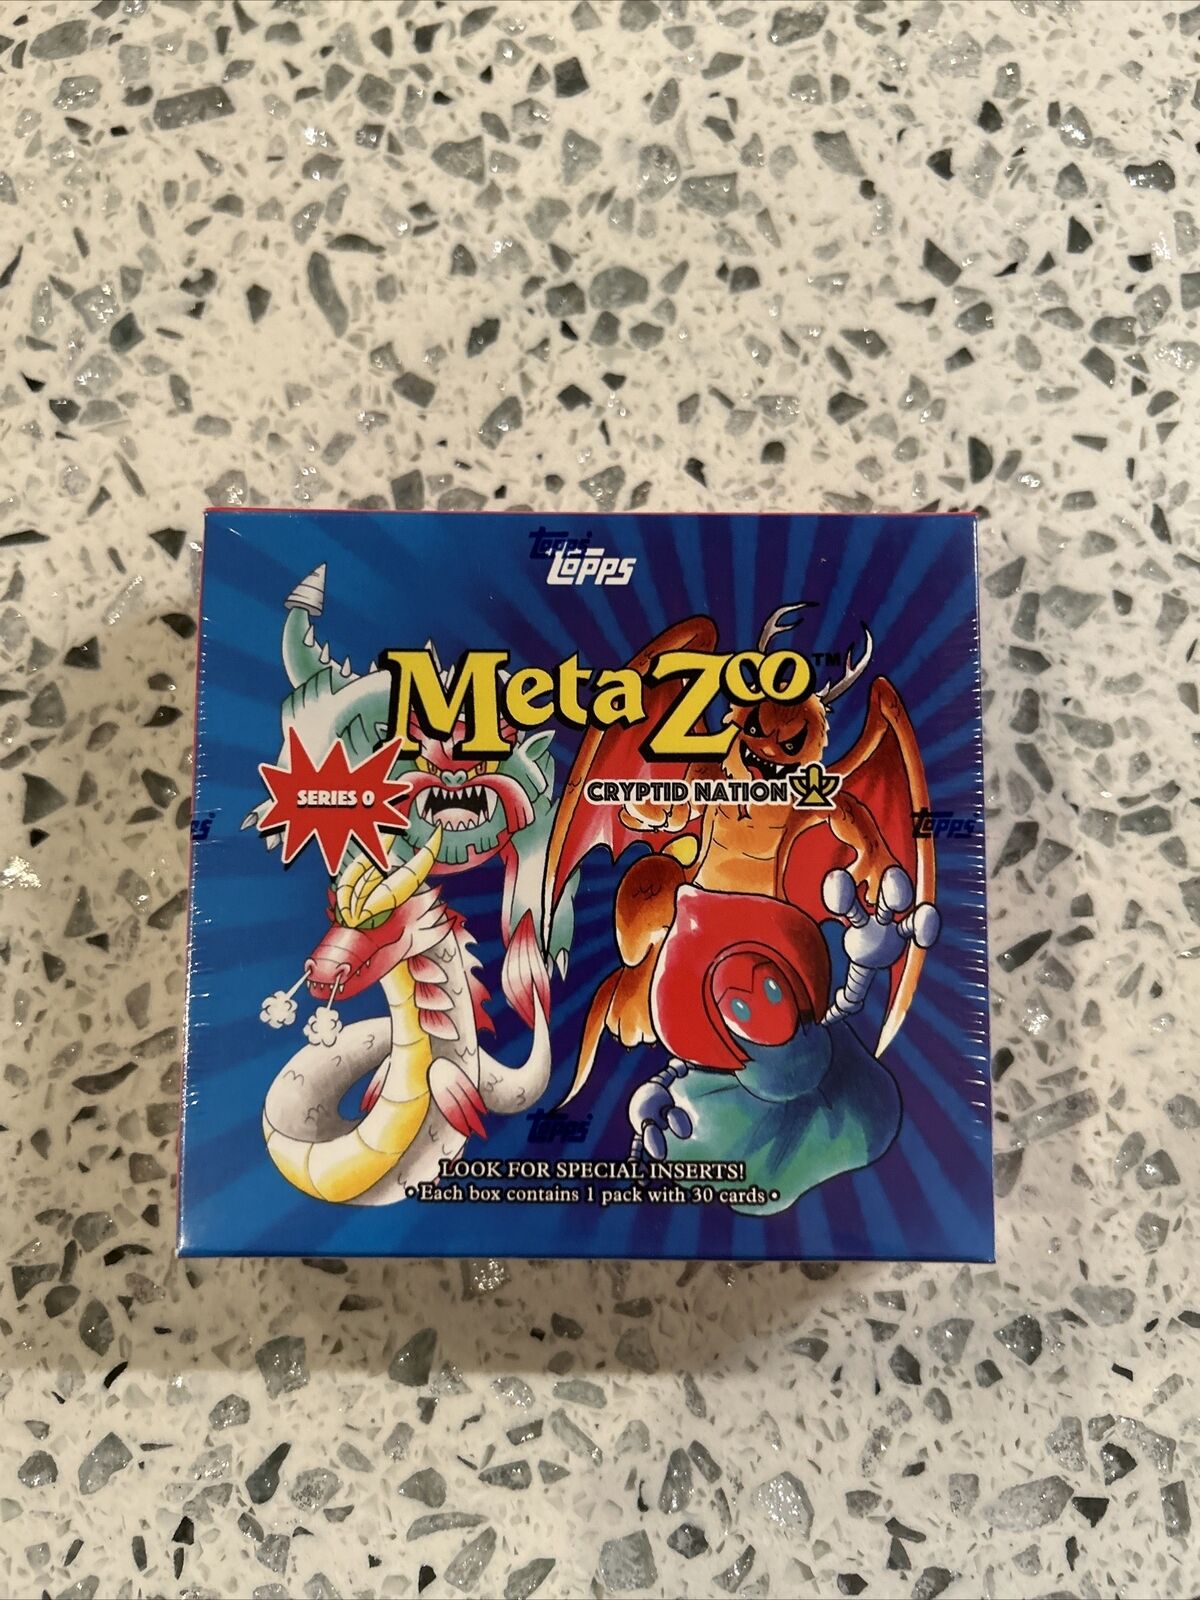 2021 Topps MetaZoo Series O Cryptid Nation 30 Card Box Pack  New Sealed